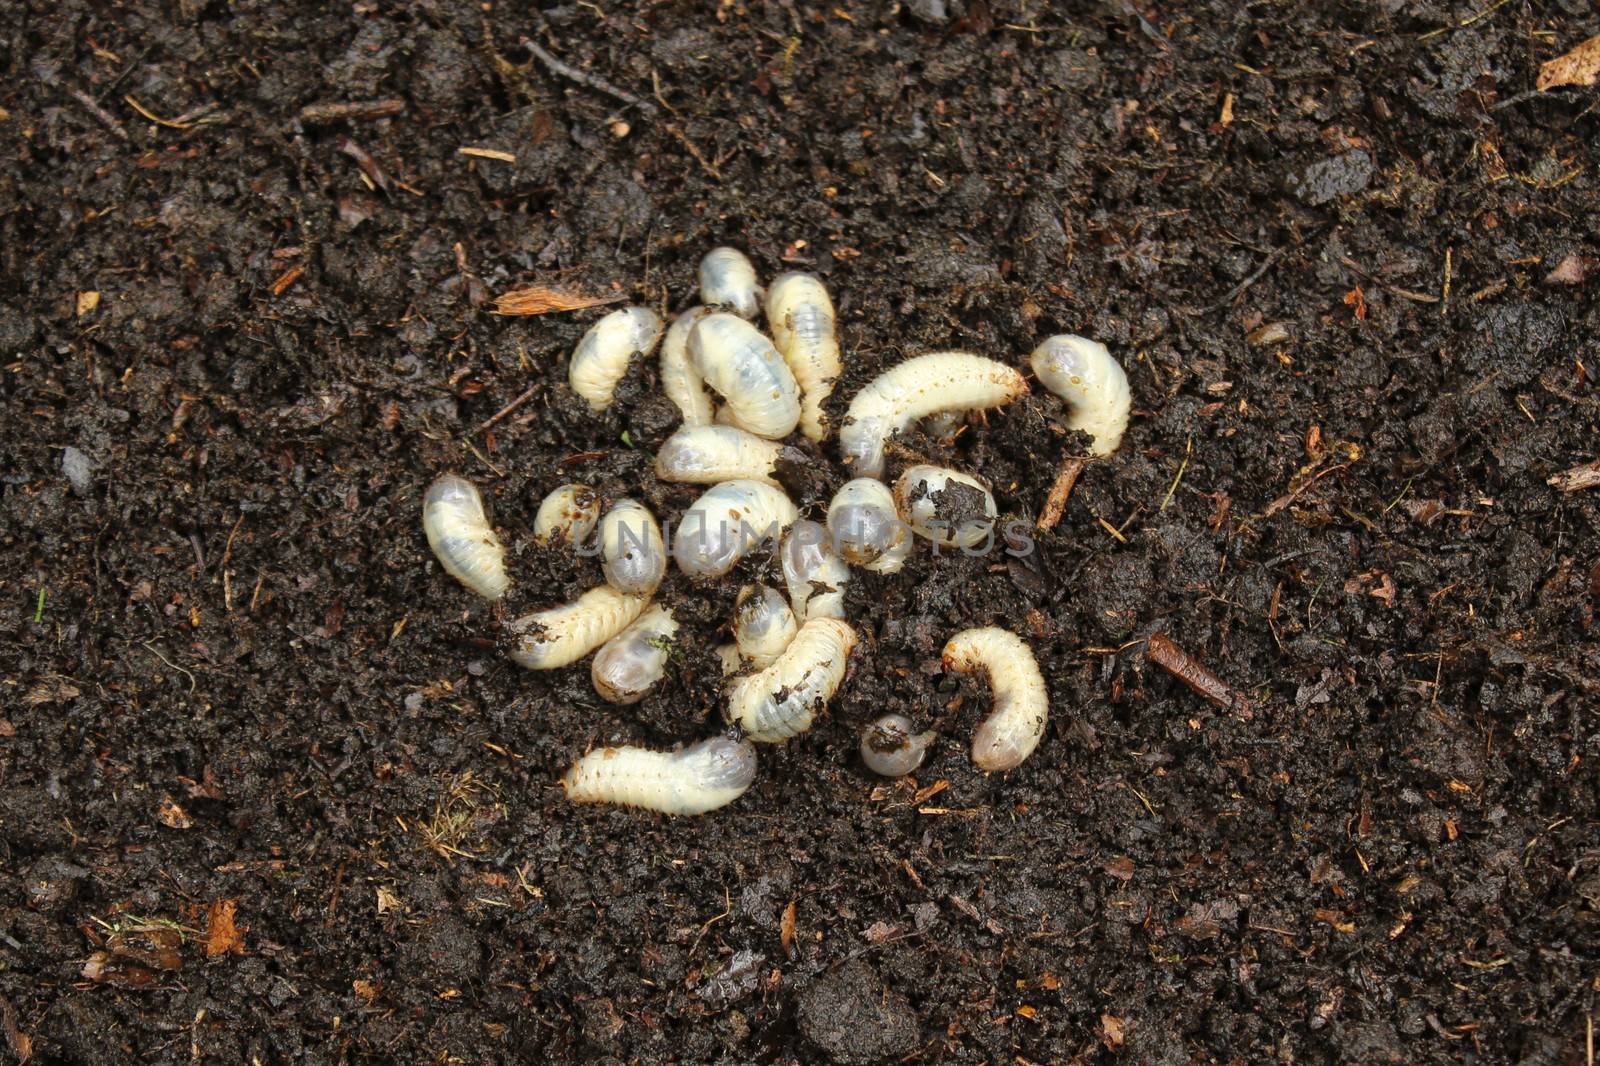 The picture shows a rose chafer larvae in the compost pile.